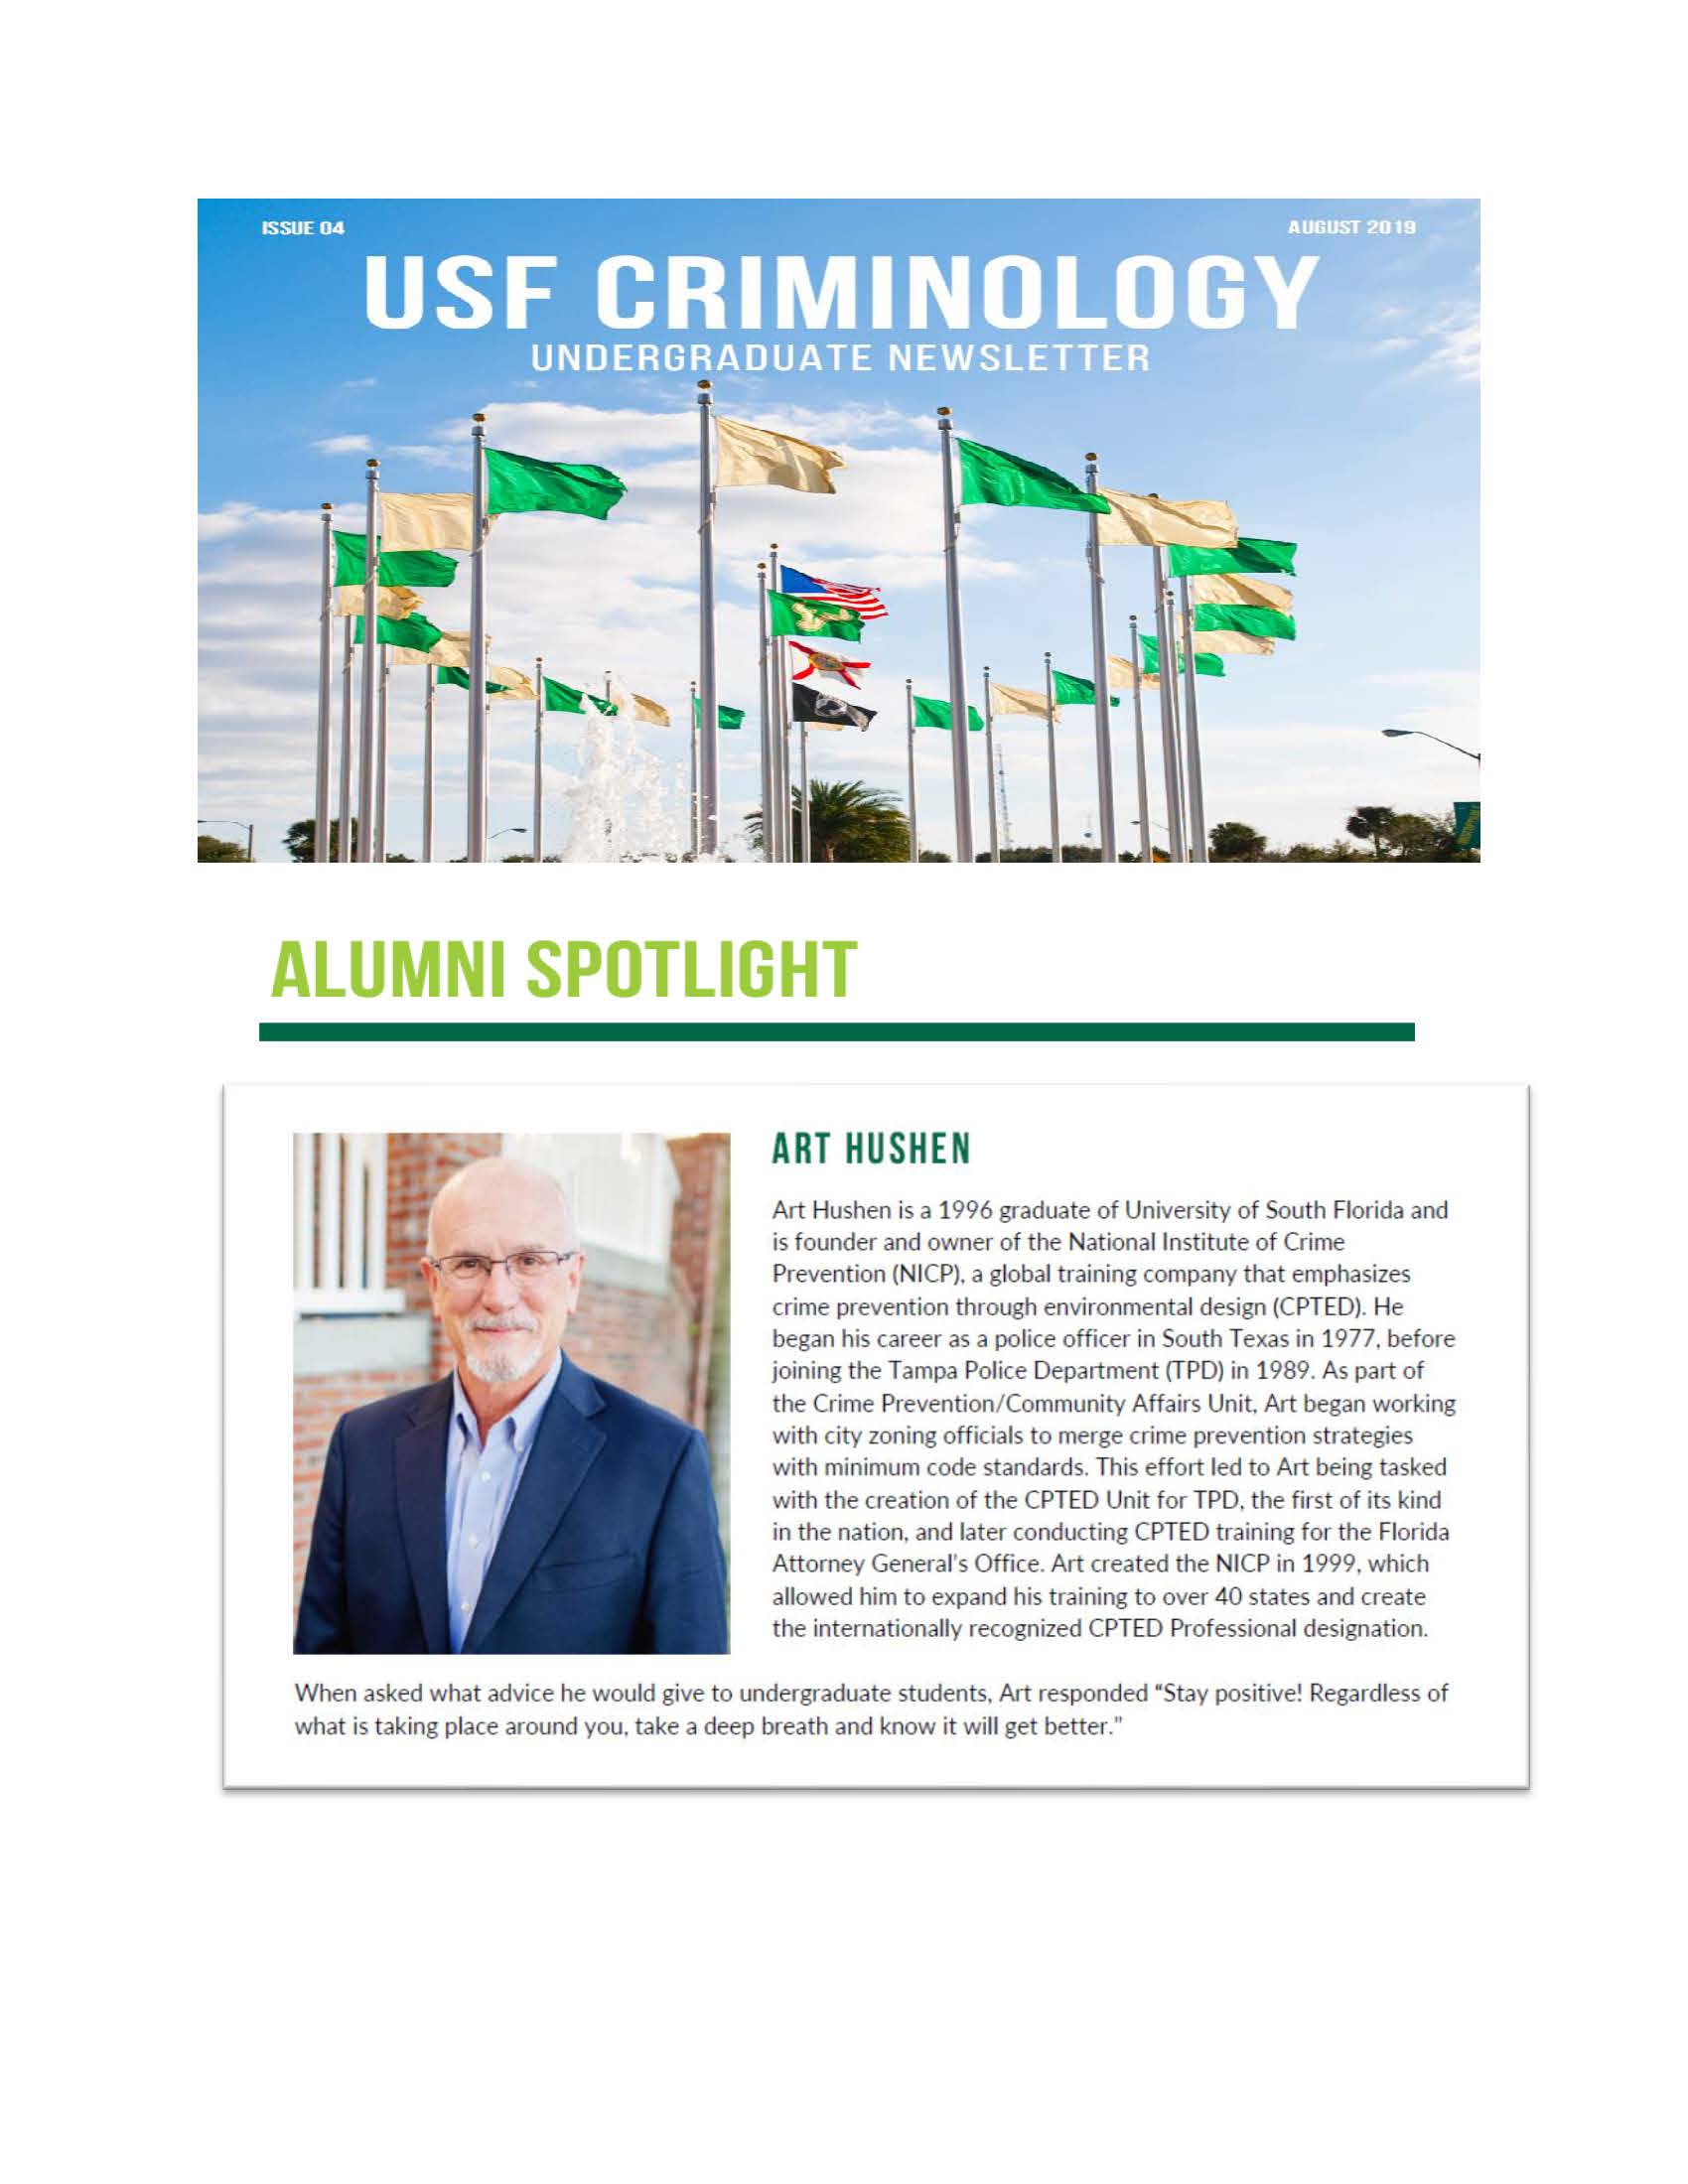 Shout Out to Art Hushen & the NICP in USF Criminology Newsletter – GO BULLS!